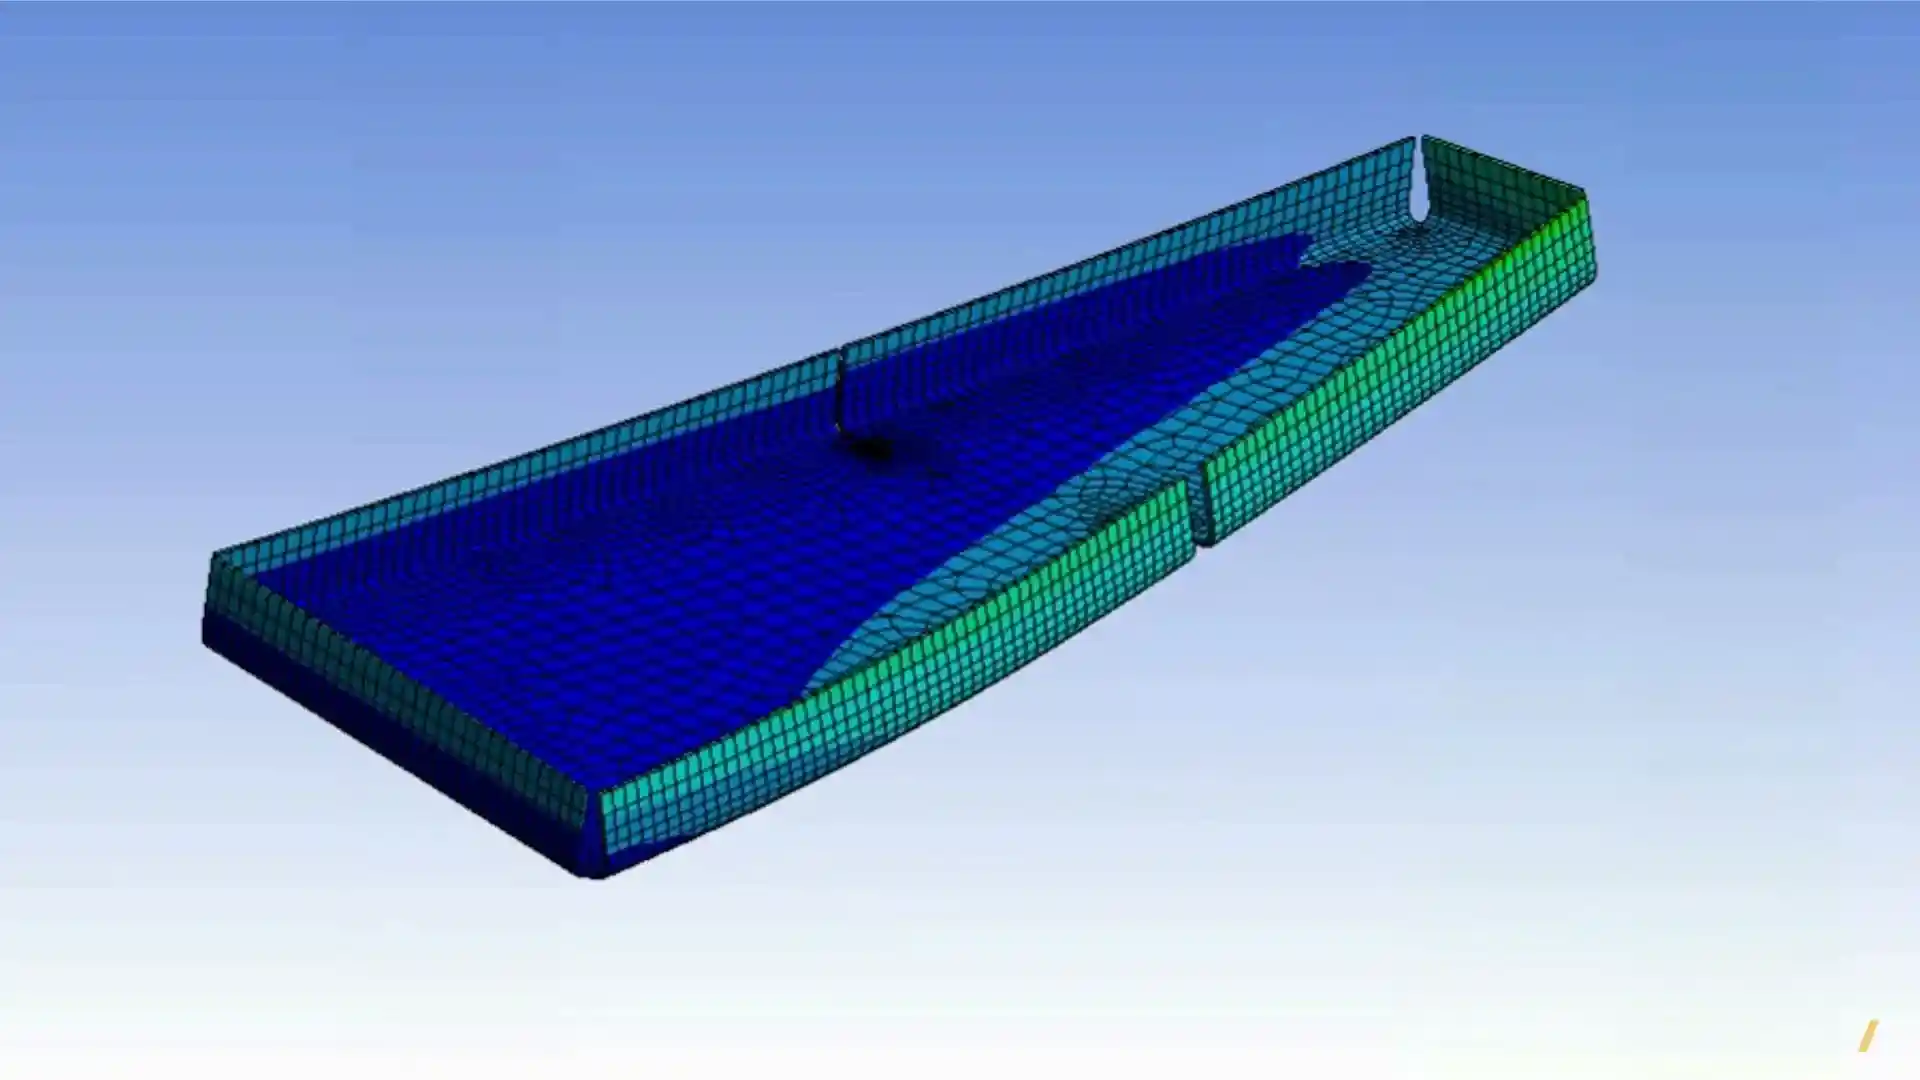 ANSYS Composite Cure Simulation Solves Curing